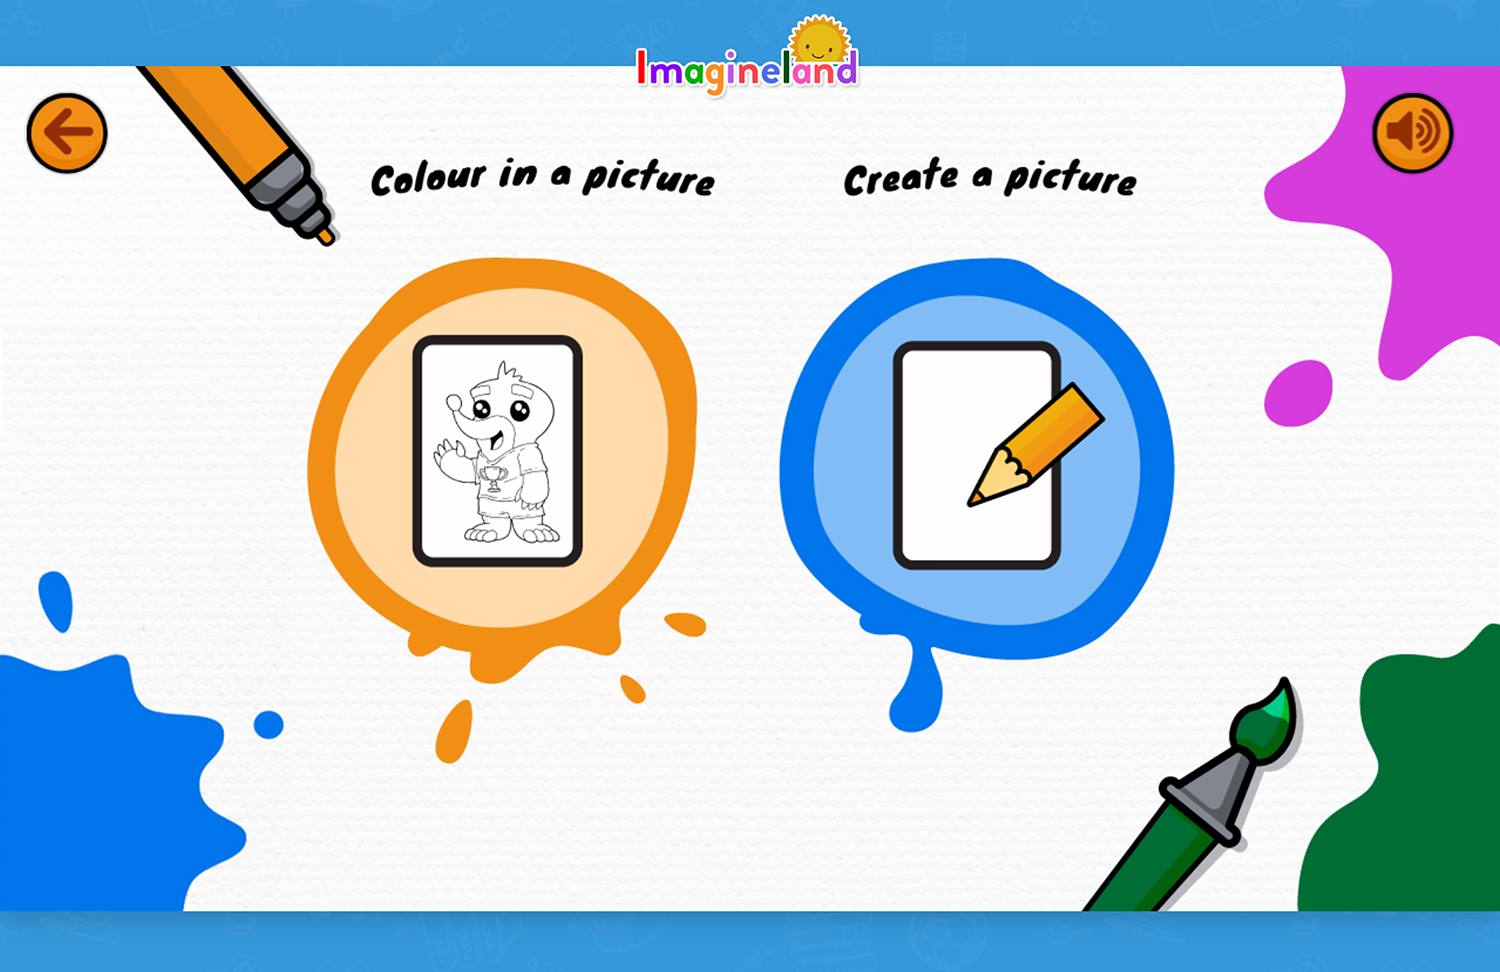 Colour in picture of Roley Poley and a pictures of a blank sheet to create you own picture.